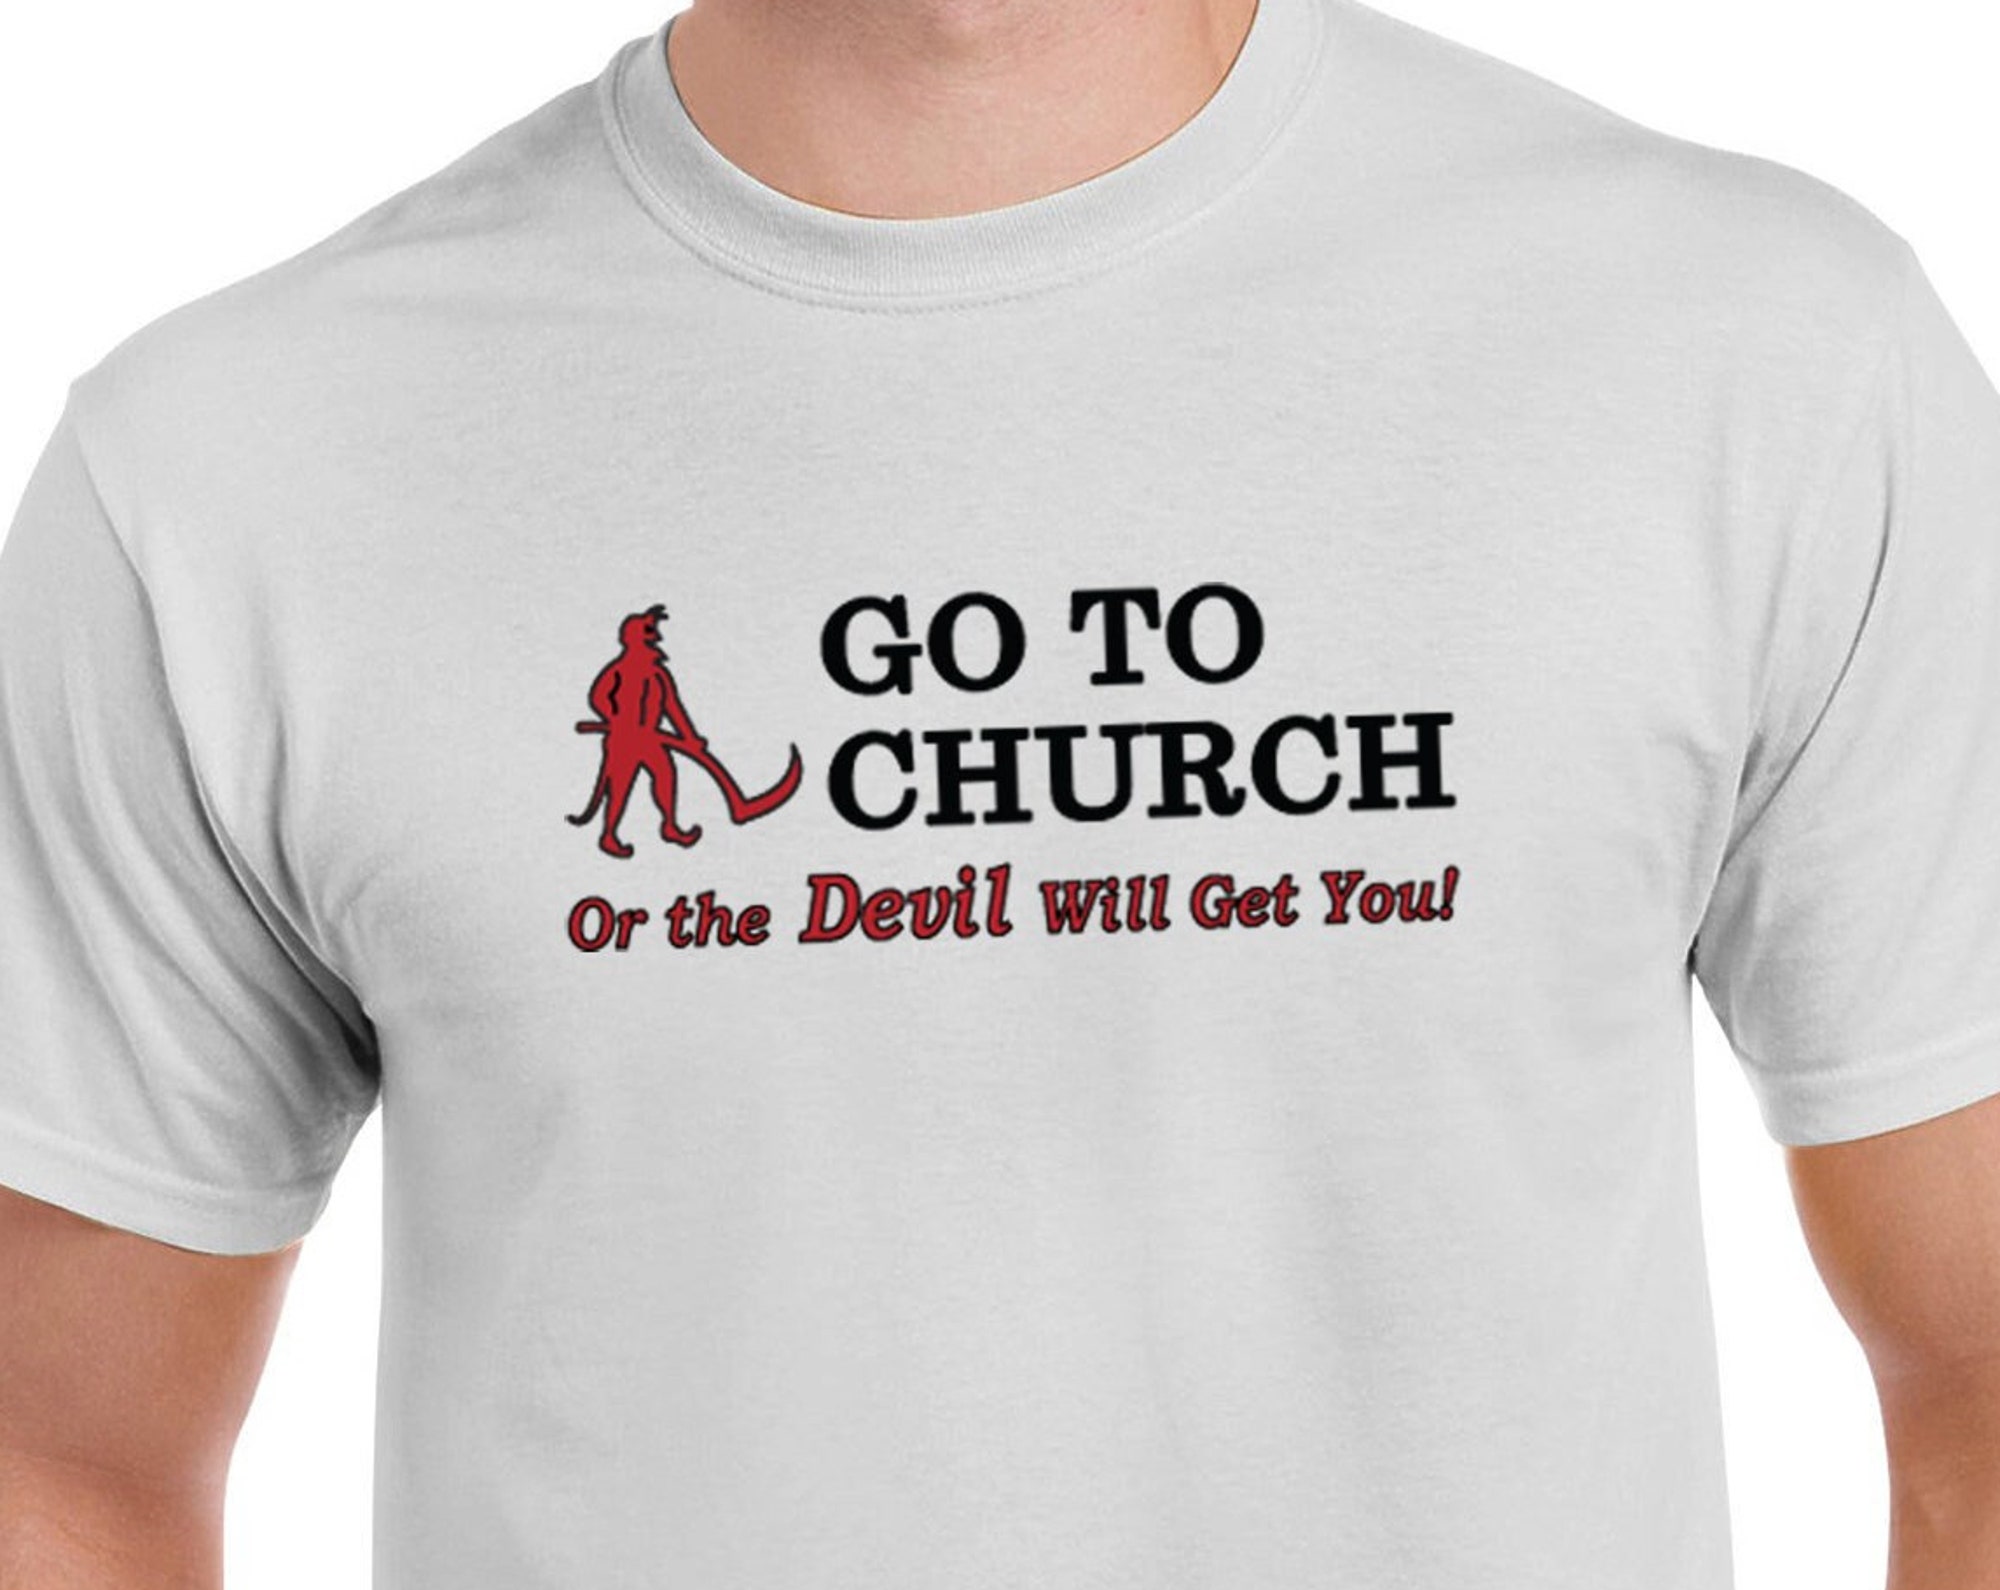 Discover Go to Church or the Devil Will Get You! t shirt